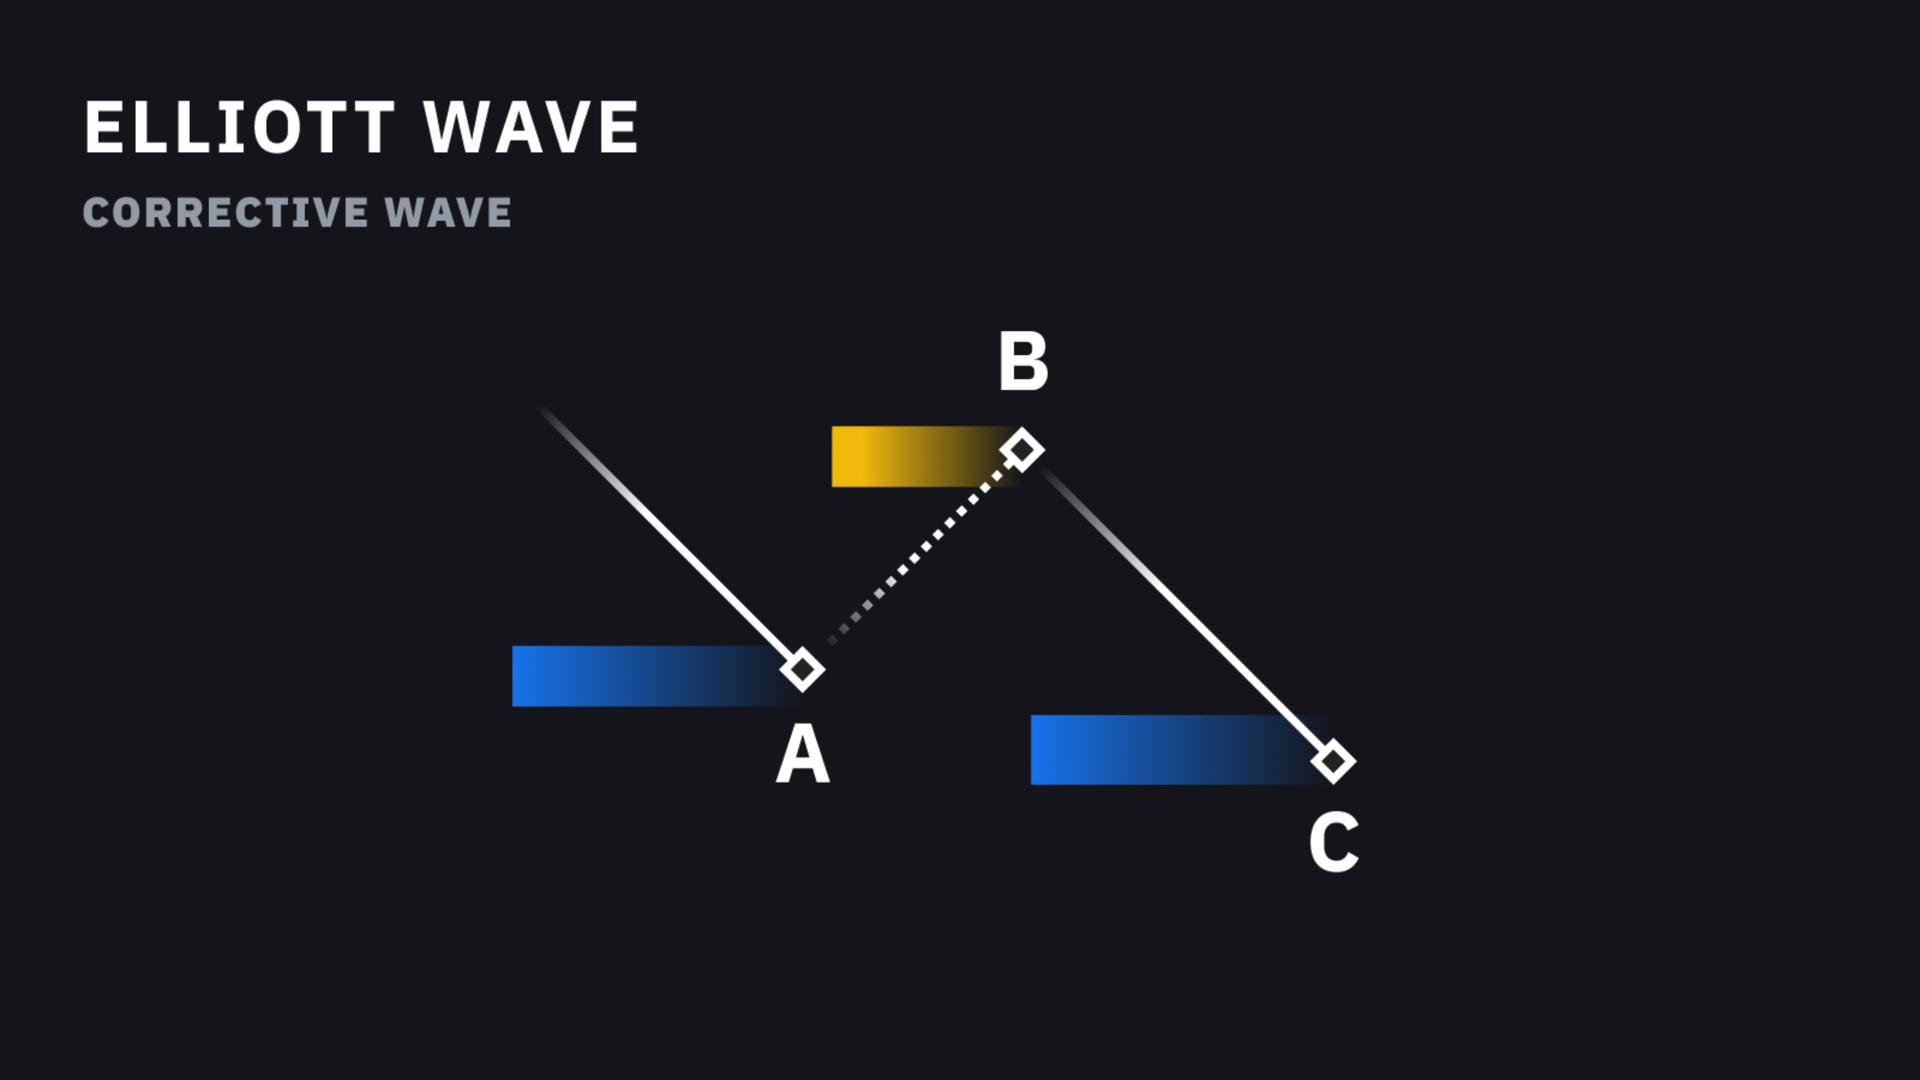 Your detailed guide to the Elliott Wave expanding triangle pattern